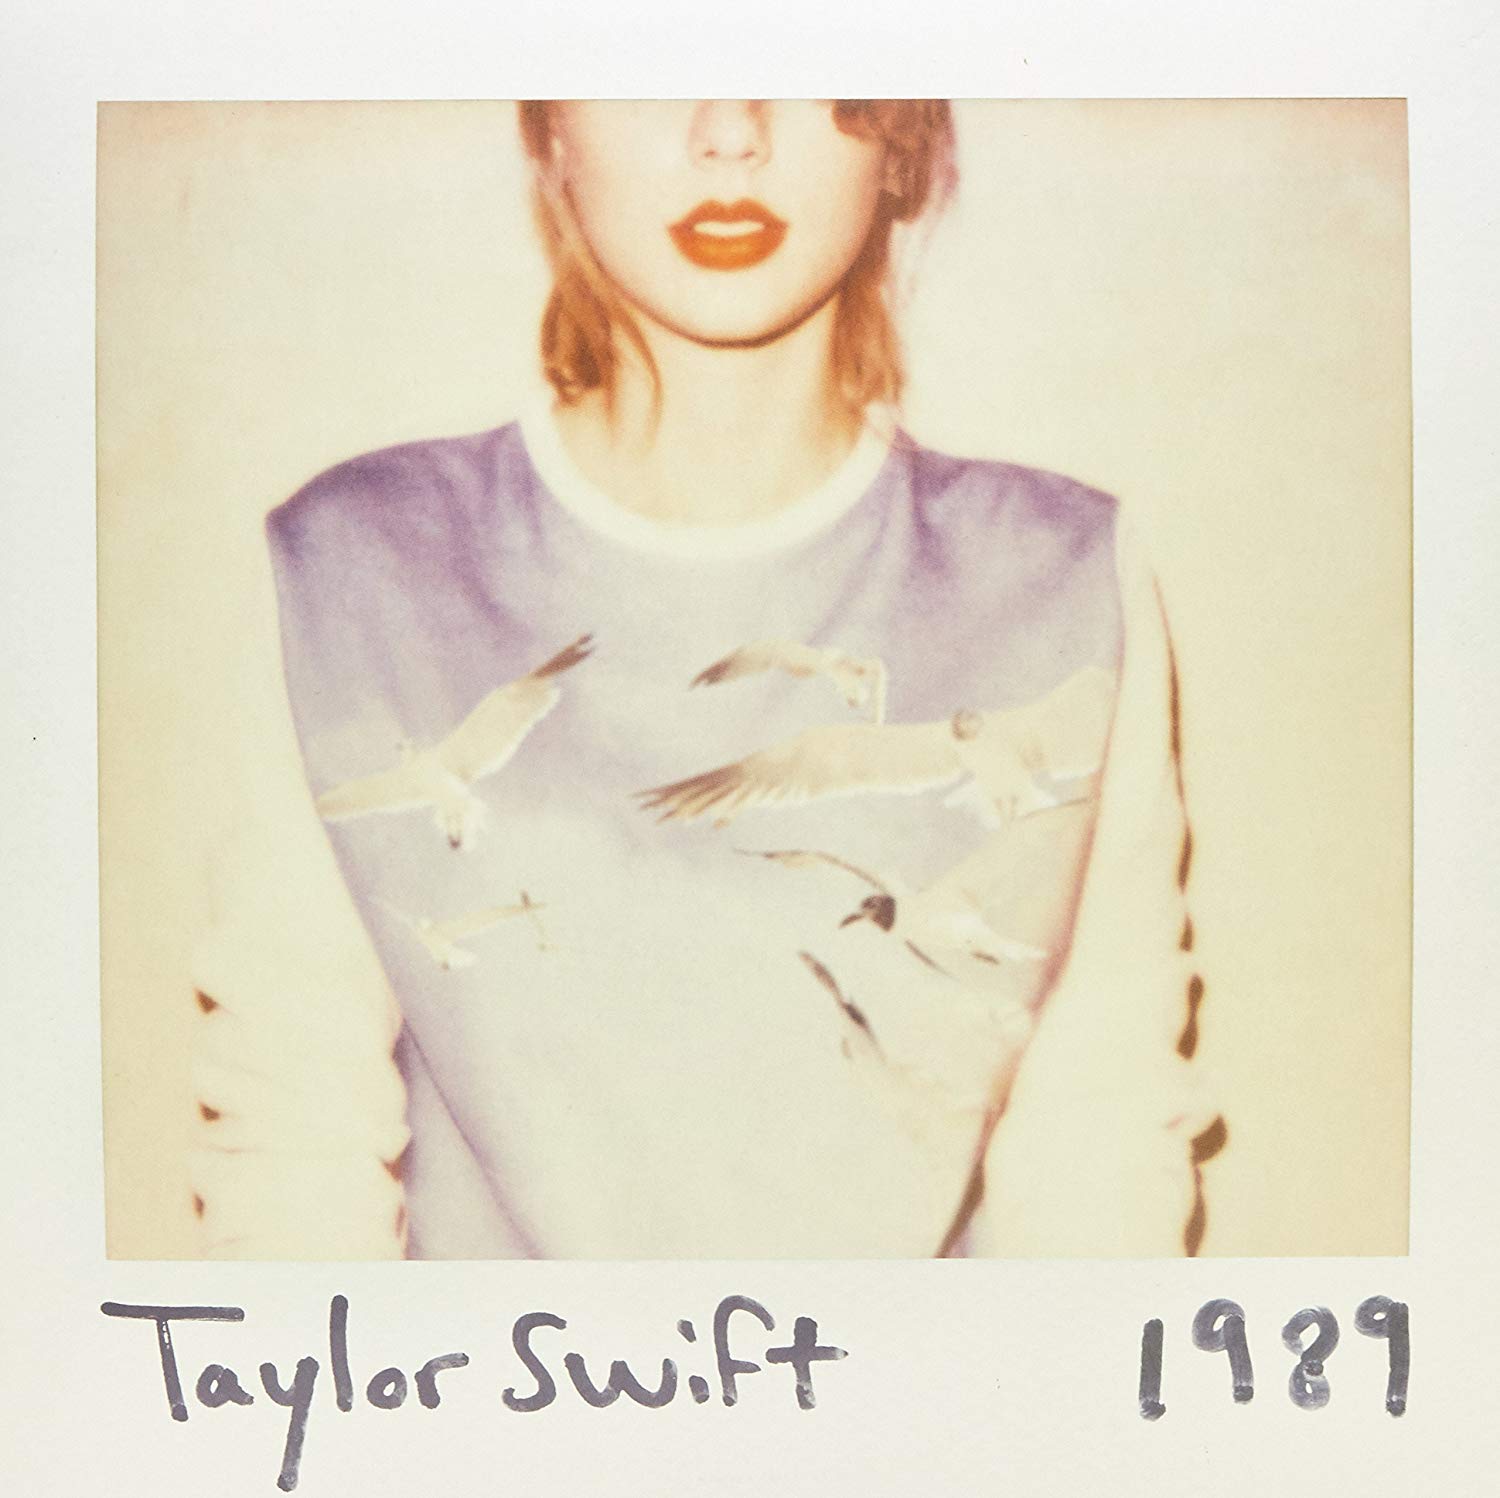 Billboard 200: Taylor Swift’s ‘1989’ Returns To The Top 10 For The First Time Since 2016